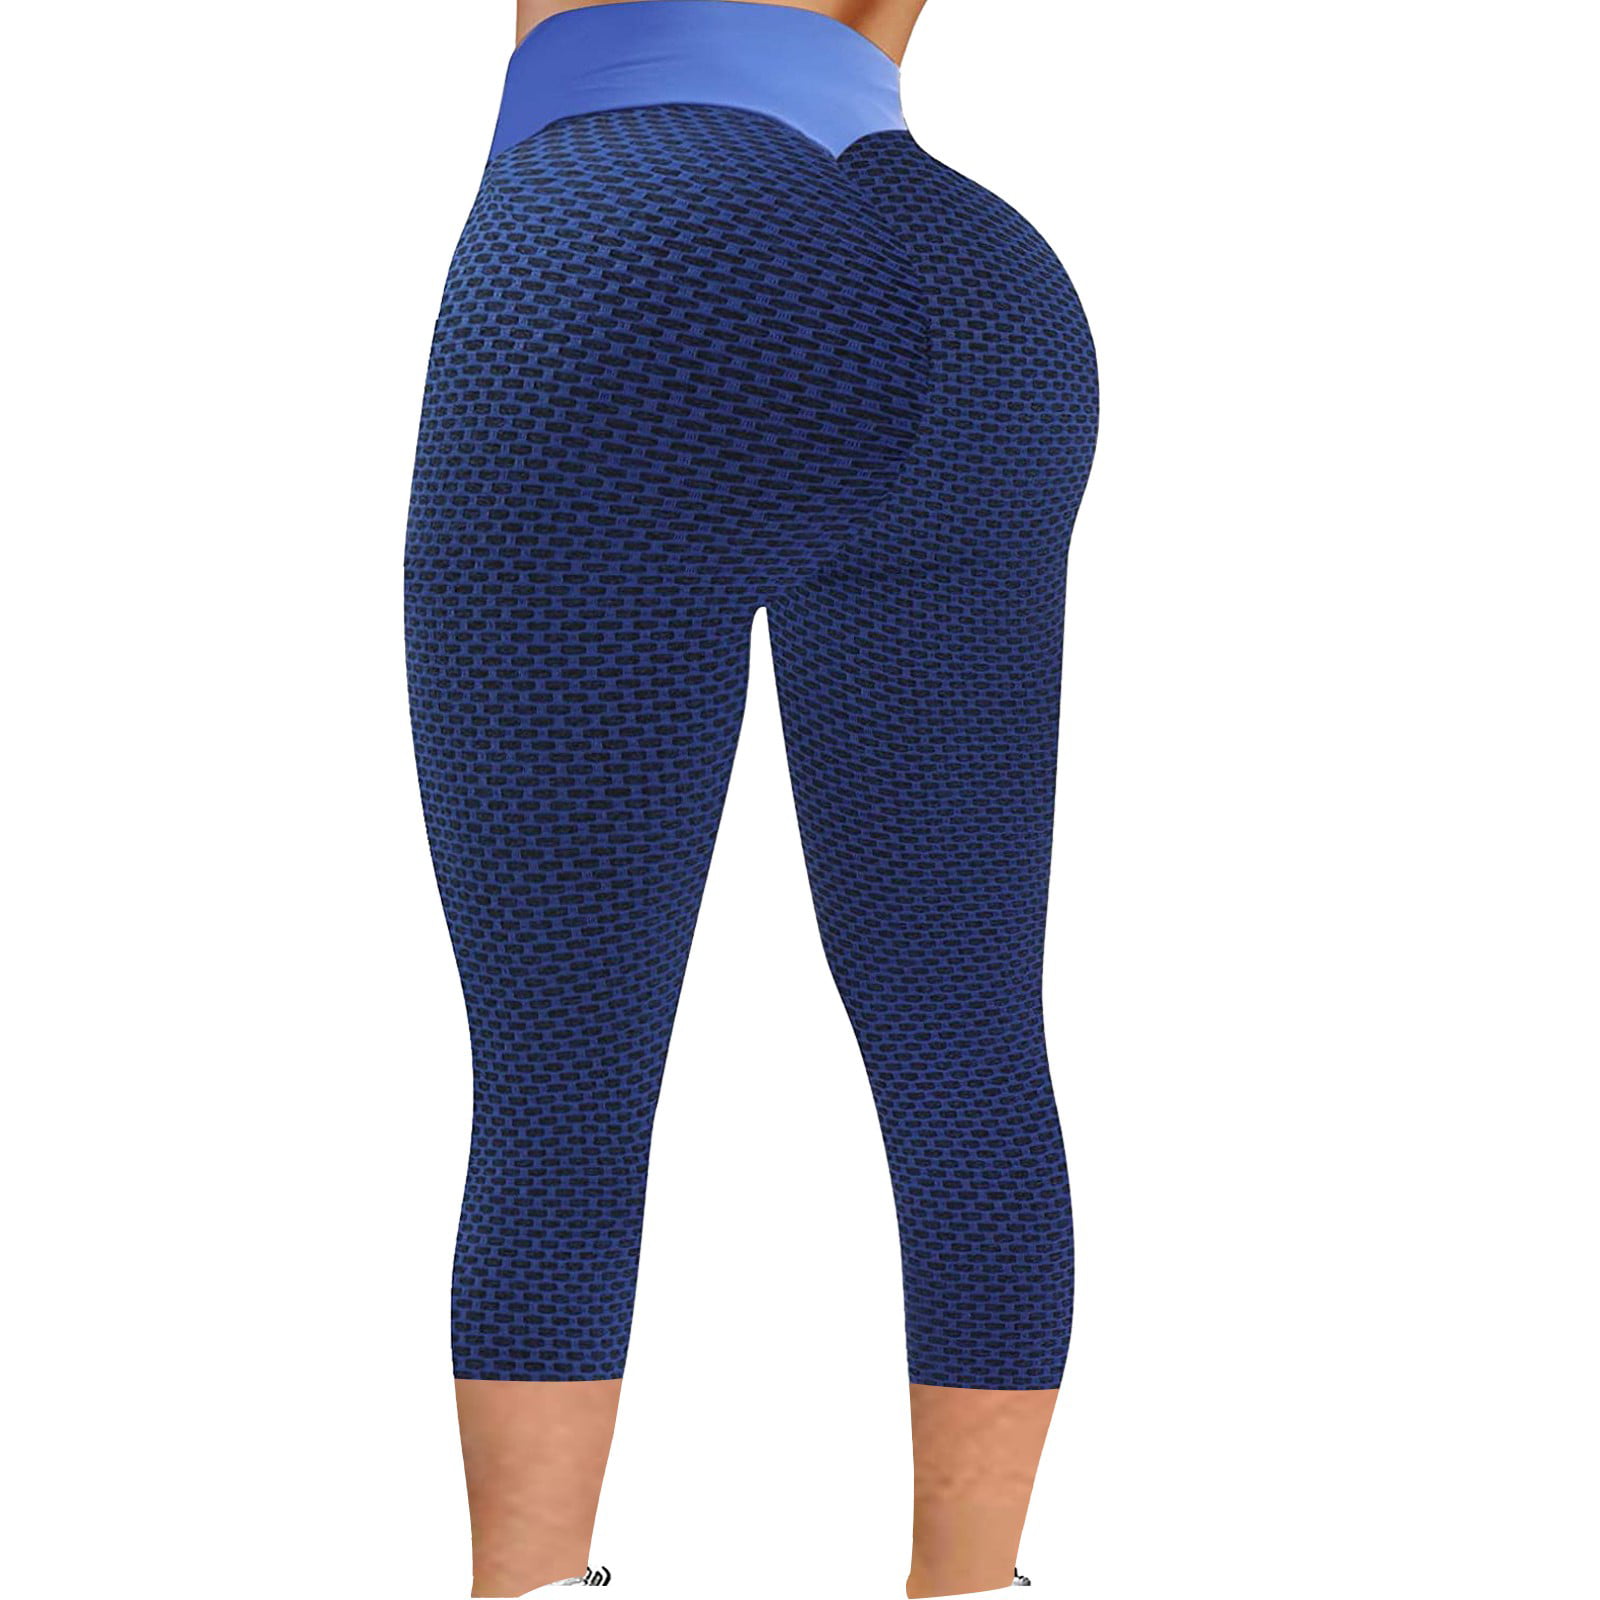 Women Cropped Yoga Fitness Leggings Running Gym Stretch Sports Pants Trousers US